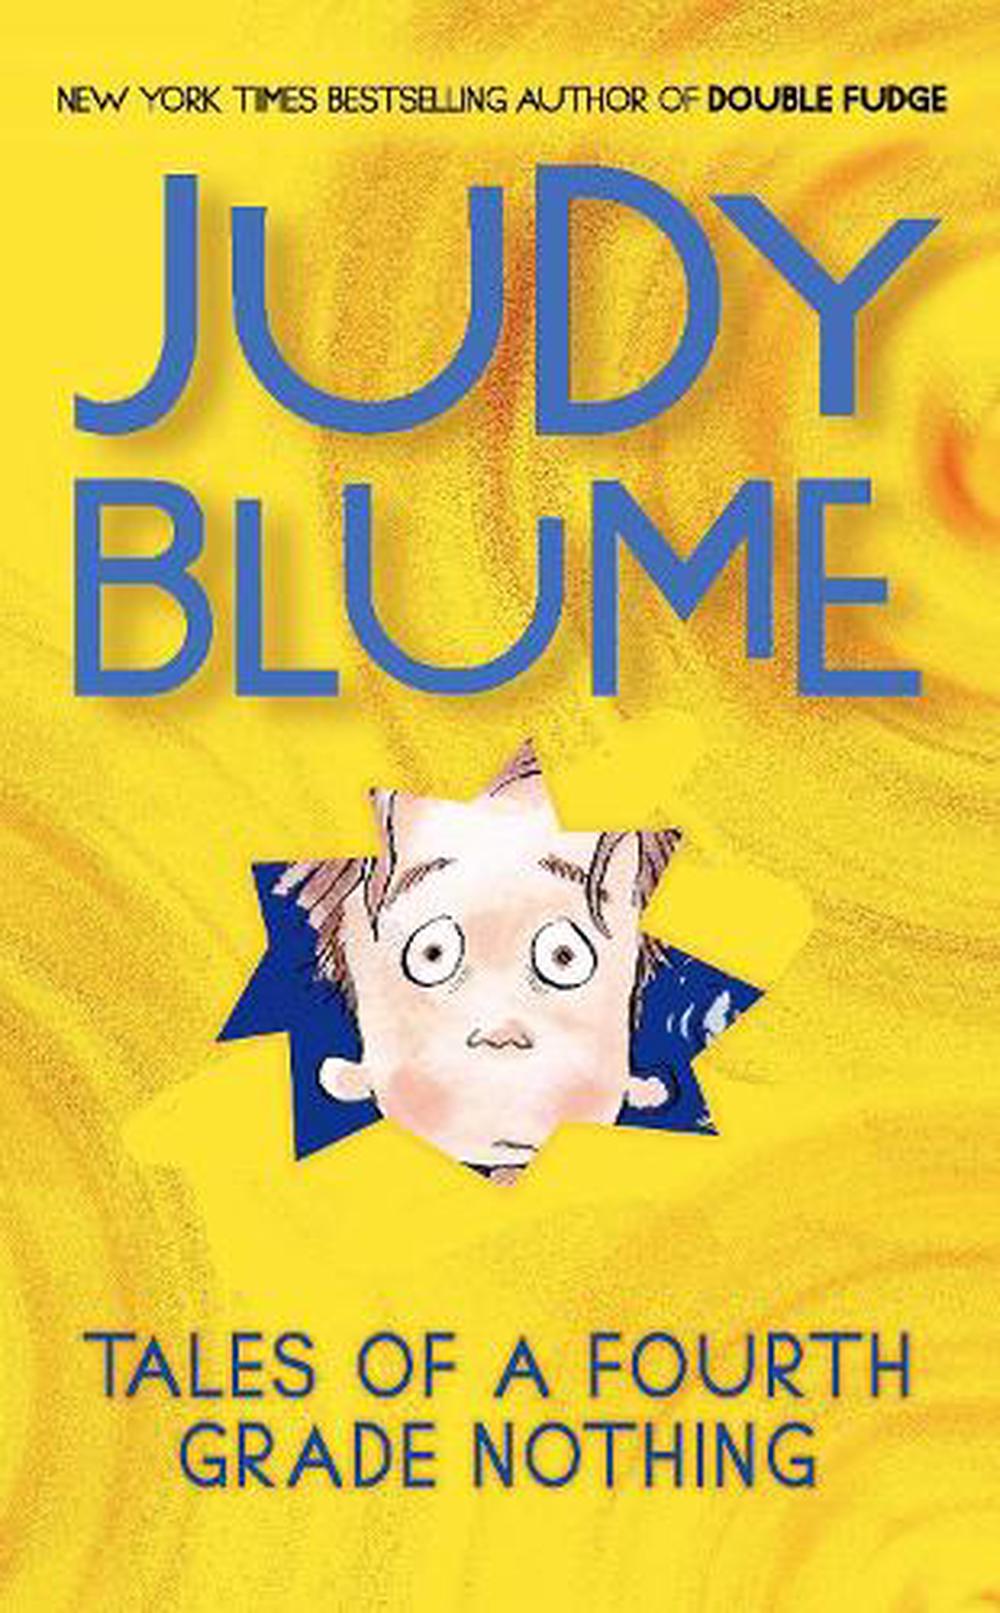 9780425193792　Nothing　a　Nile　Fourth　Buy　Tales　by　Judy　Blume,　Paperback,　of　at　The　Grade　online